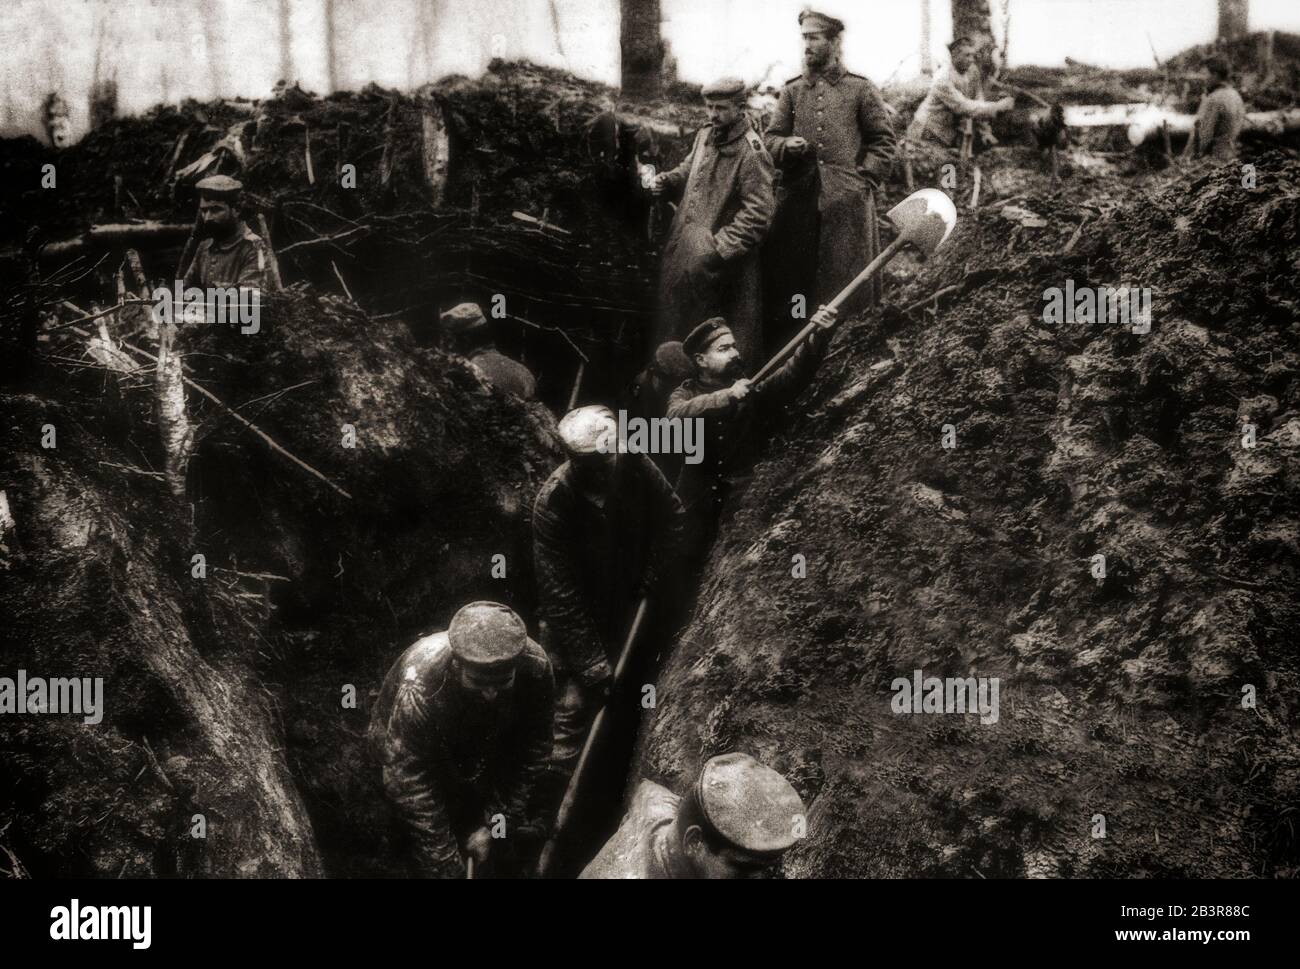 Troops of the German 5th Army digging trenches in the Argonne Region of France in 1915. Stock Photo